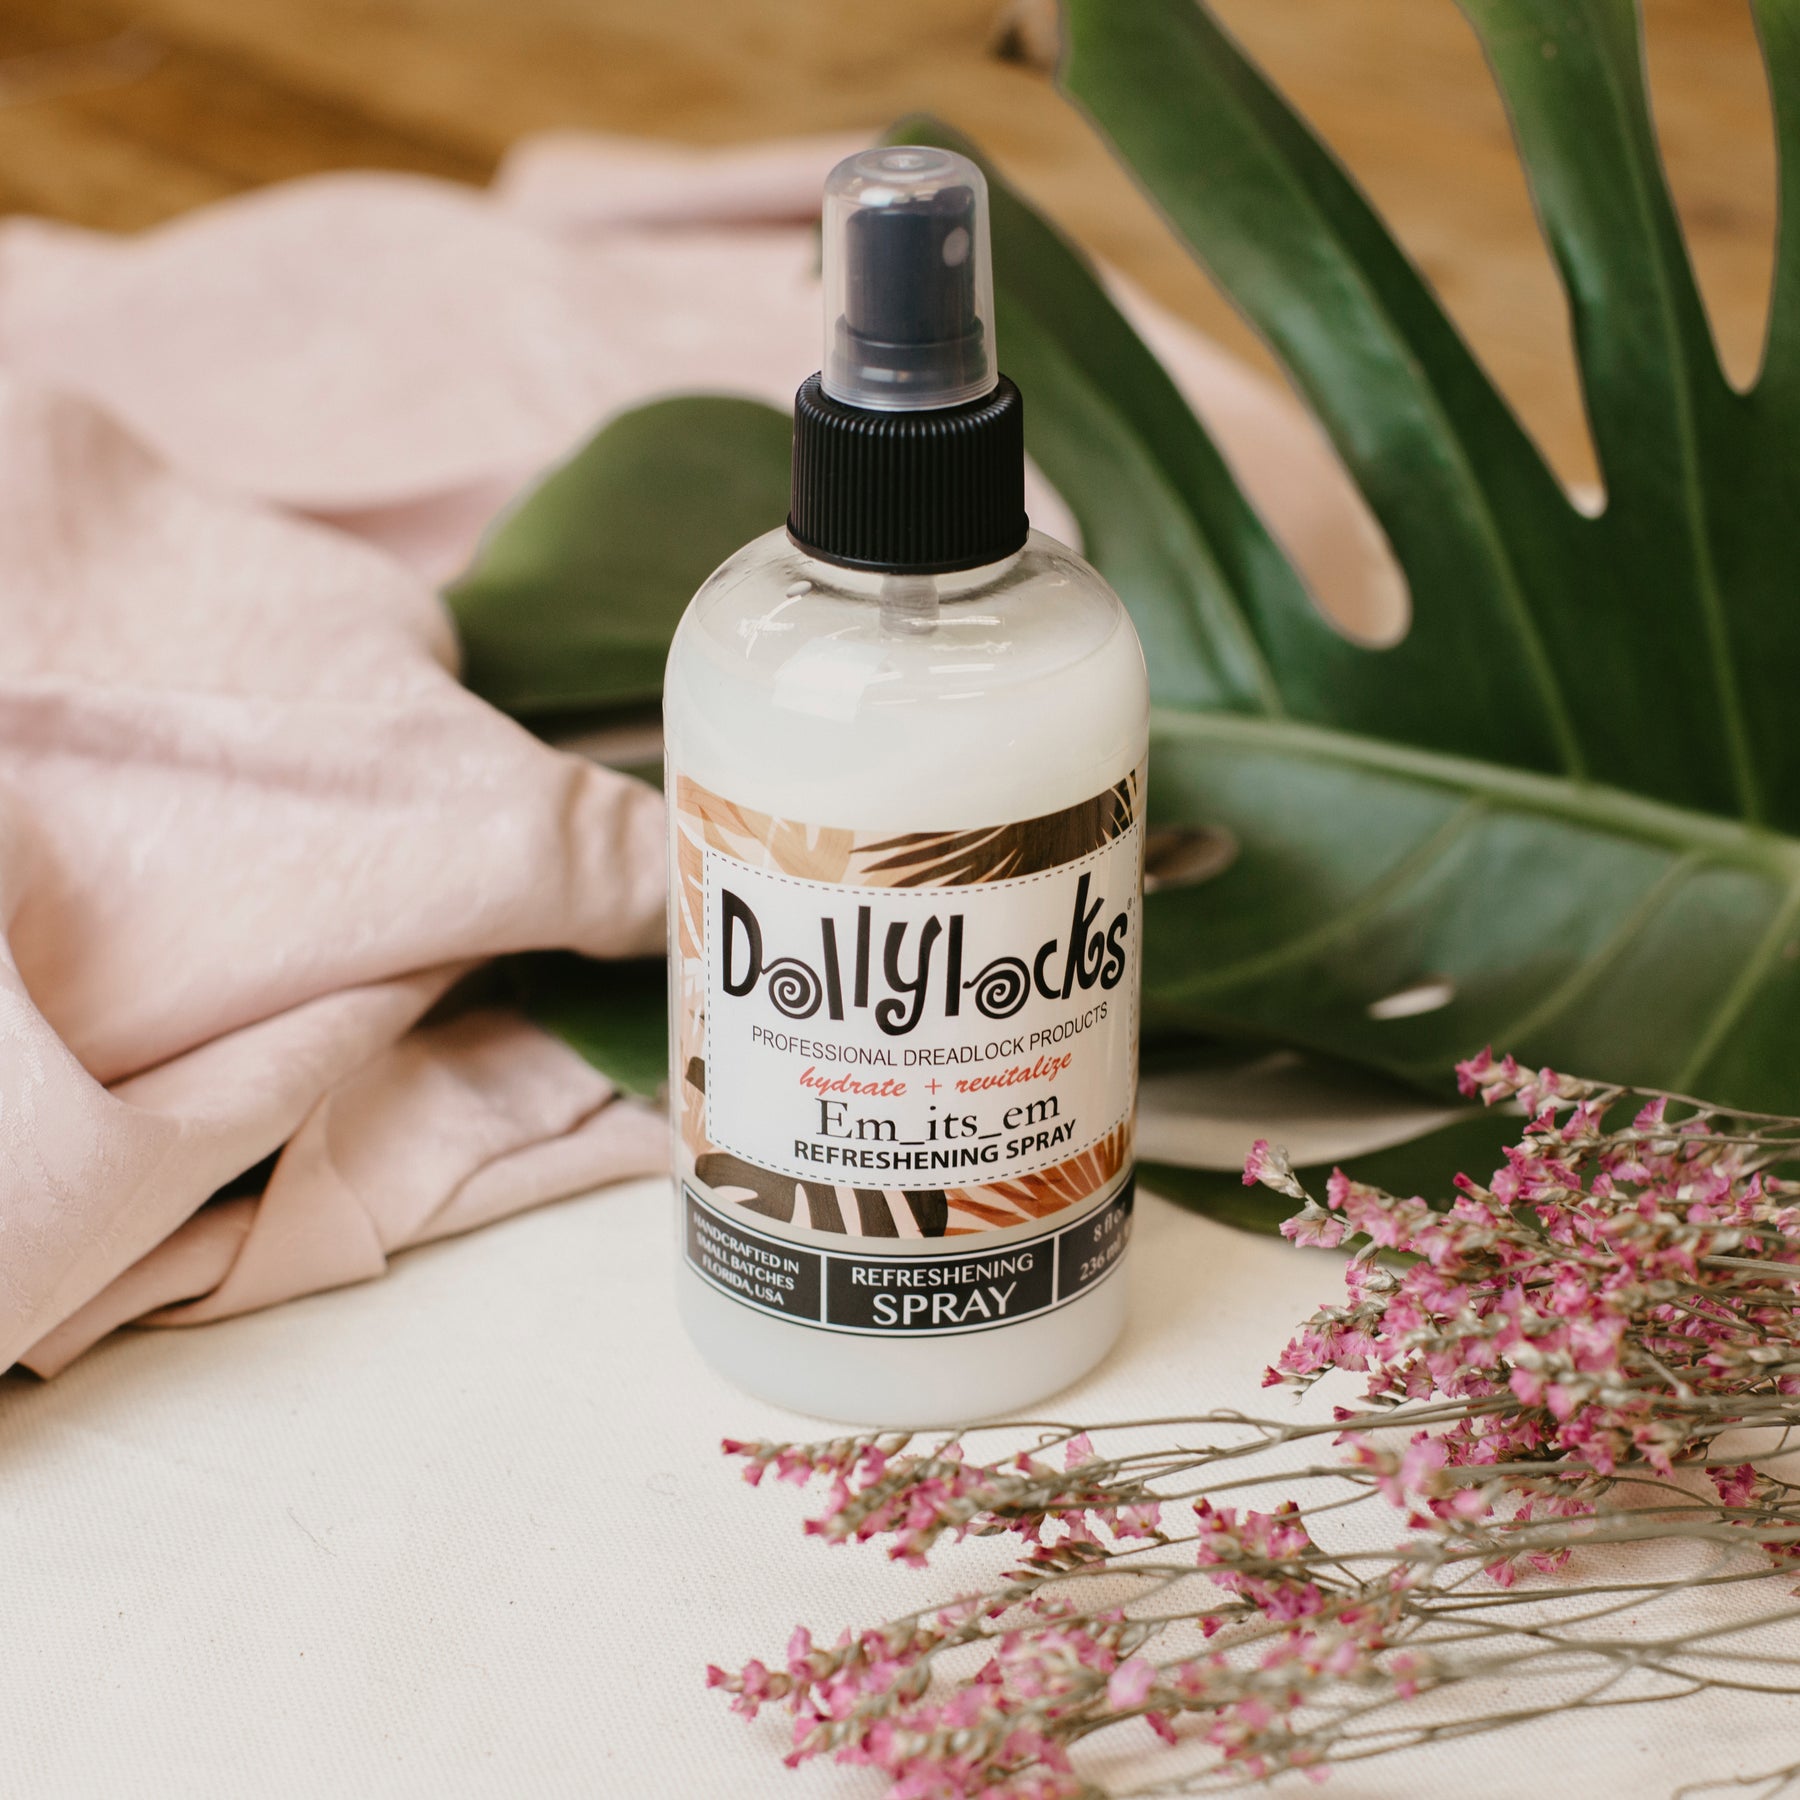 Dollylocks Organic Products - 👋Hello to all our new followers